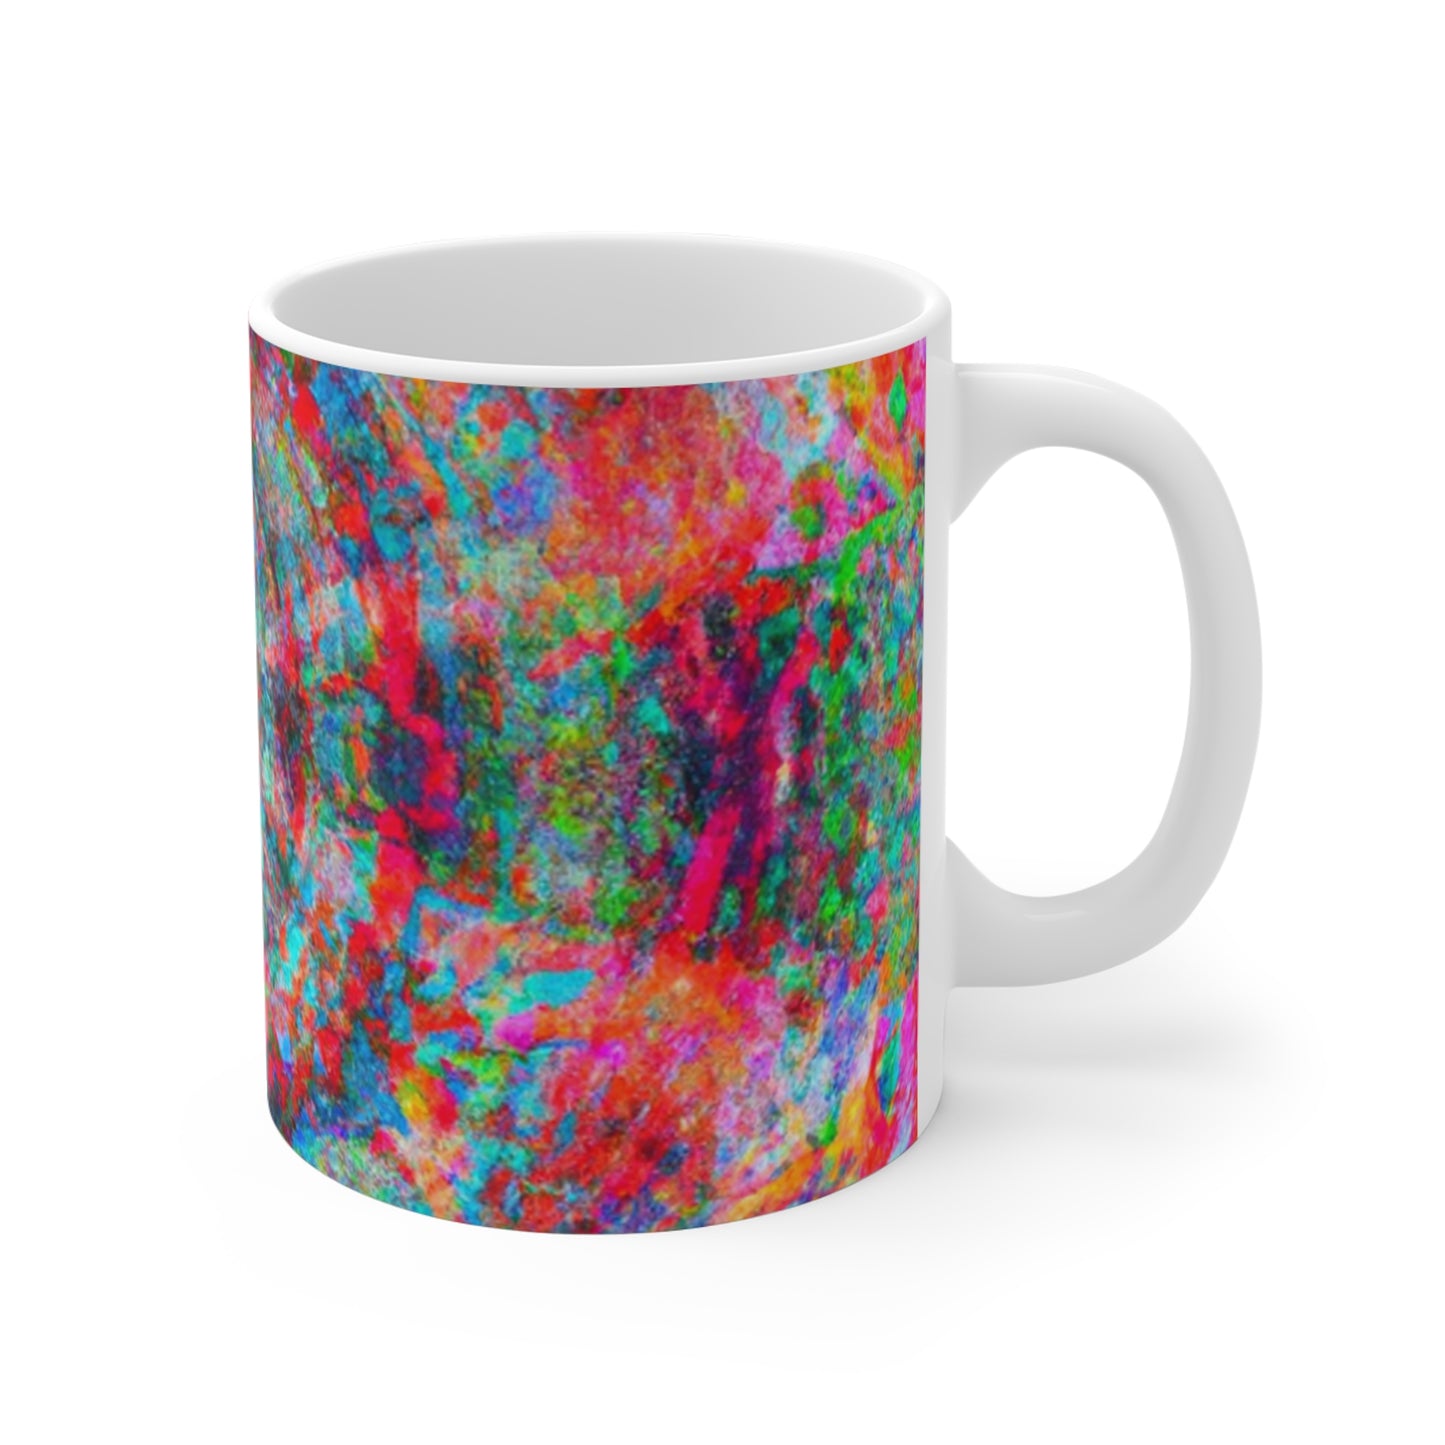 Vernon's Gourmet Coffee - Psychedelic Coffee Cup Mug 11 Ounce